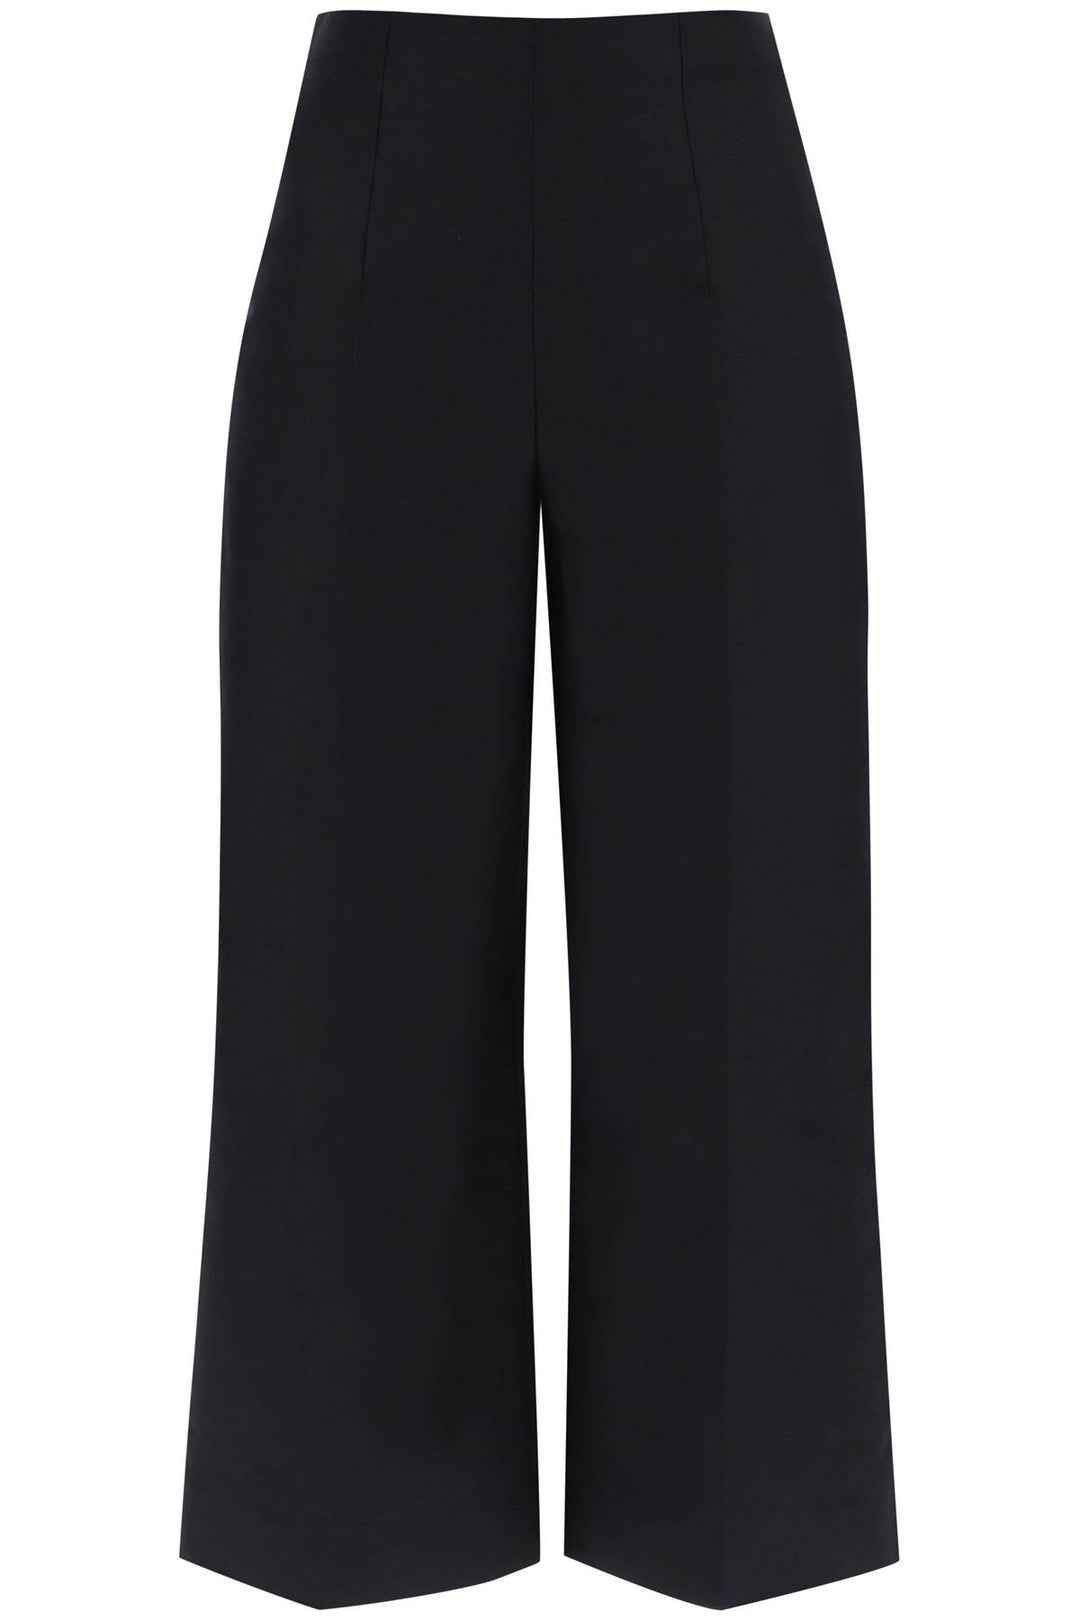 Marni Wide Legged Cropped Pants With Flared   Black